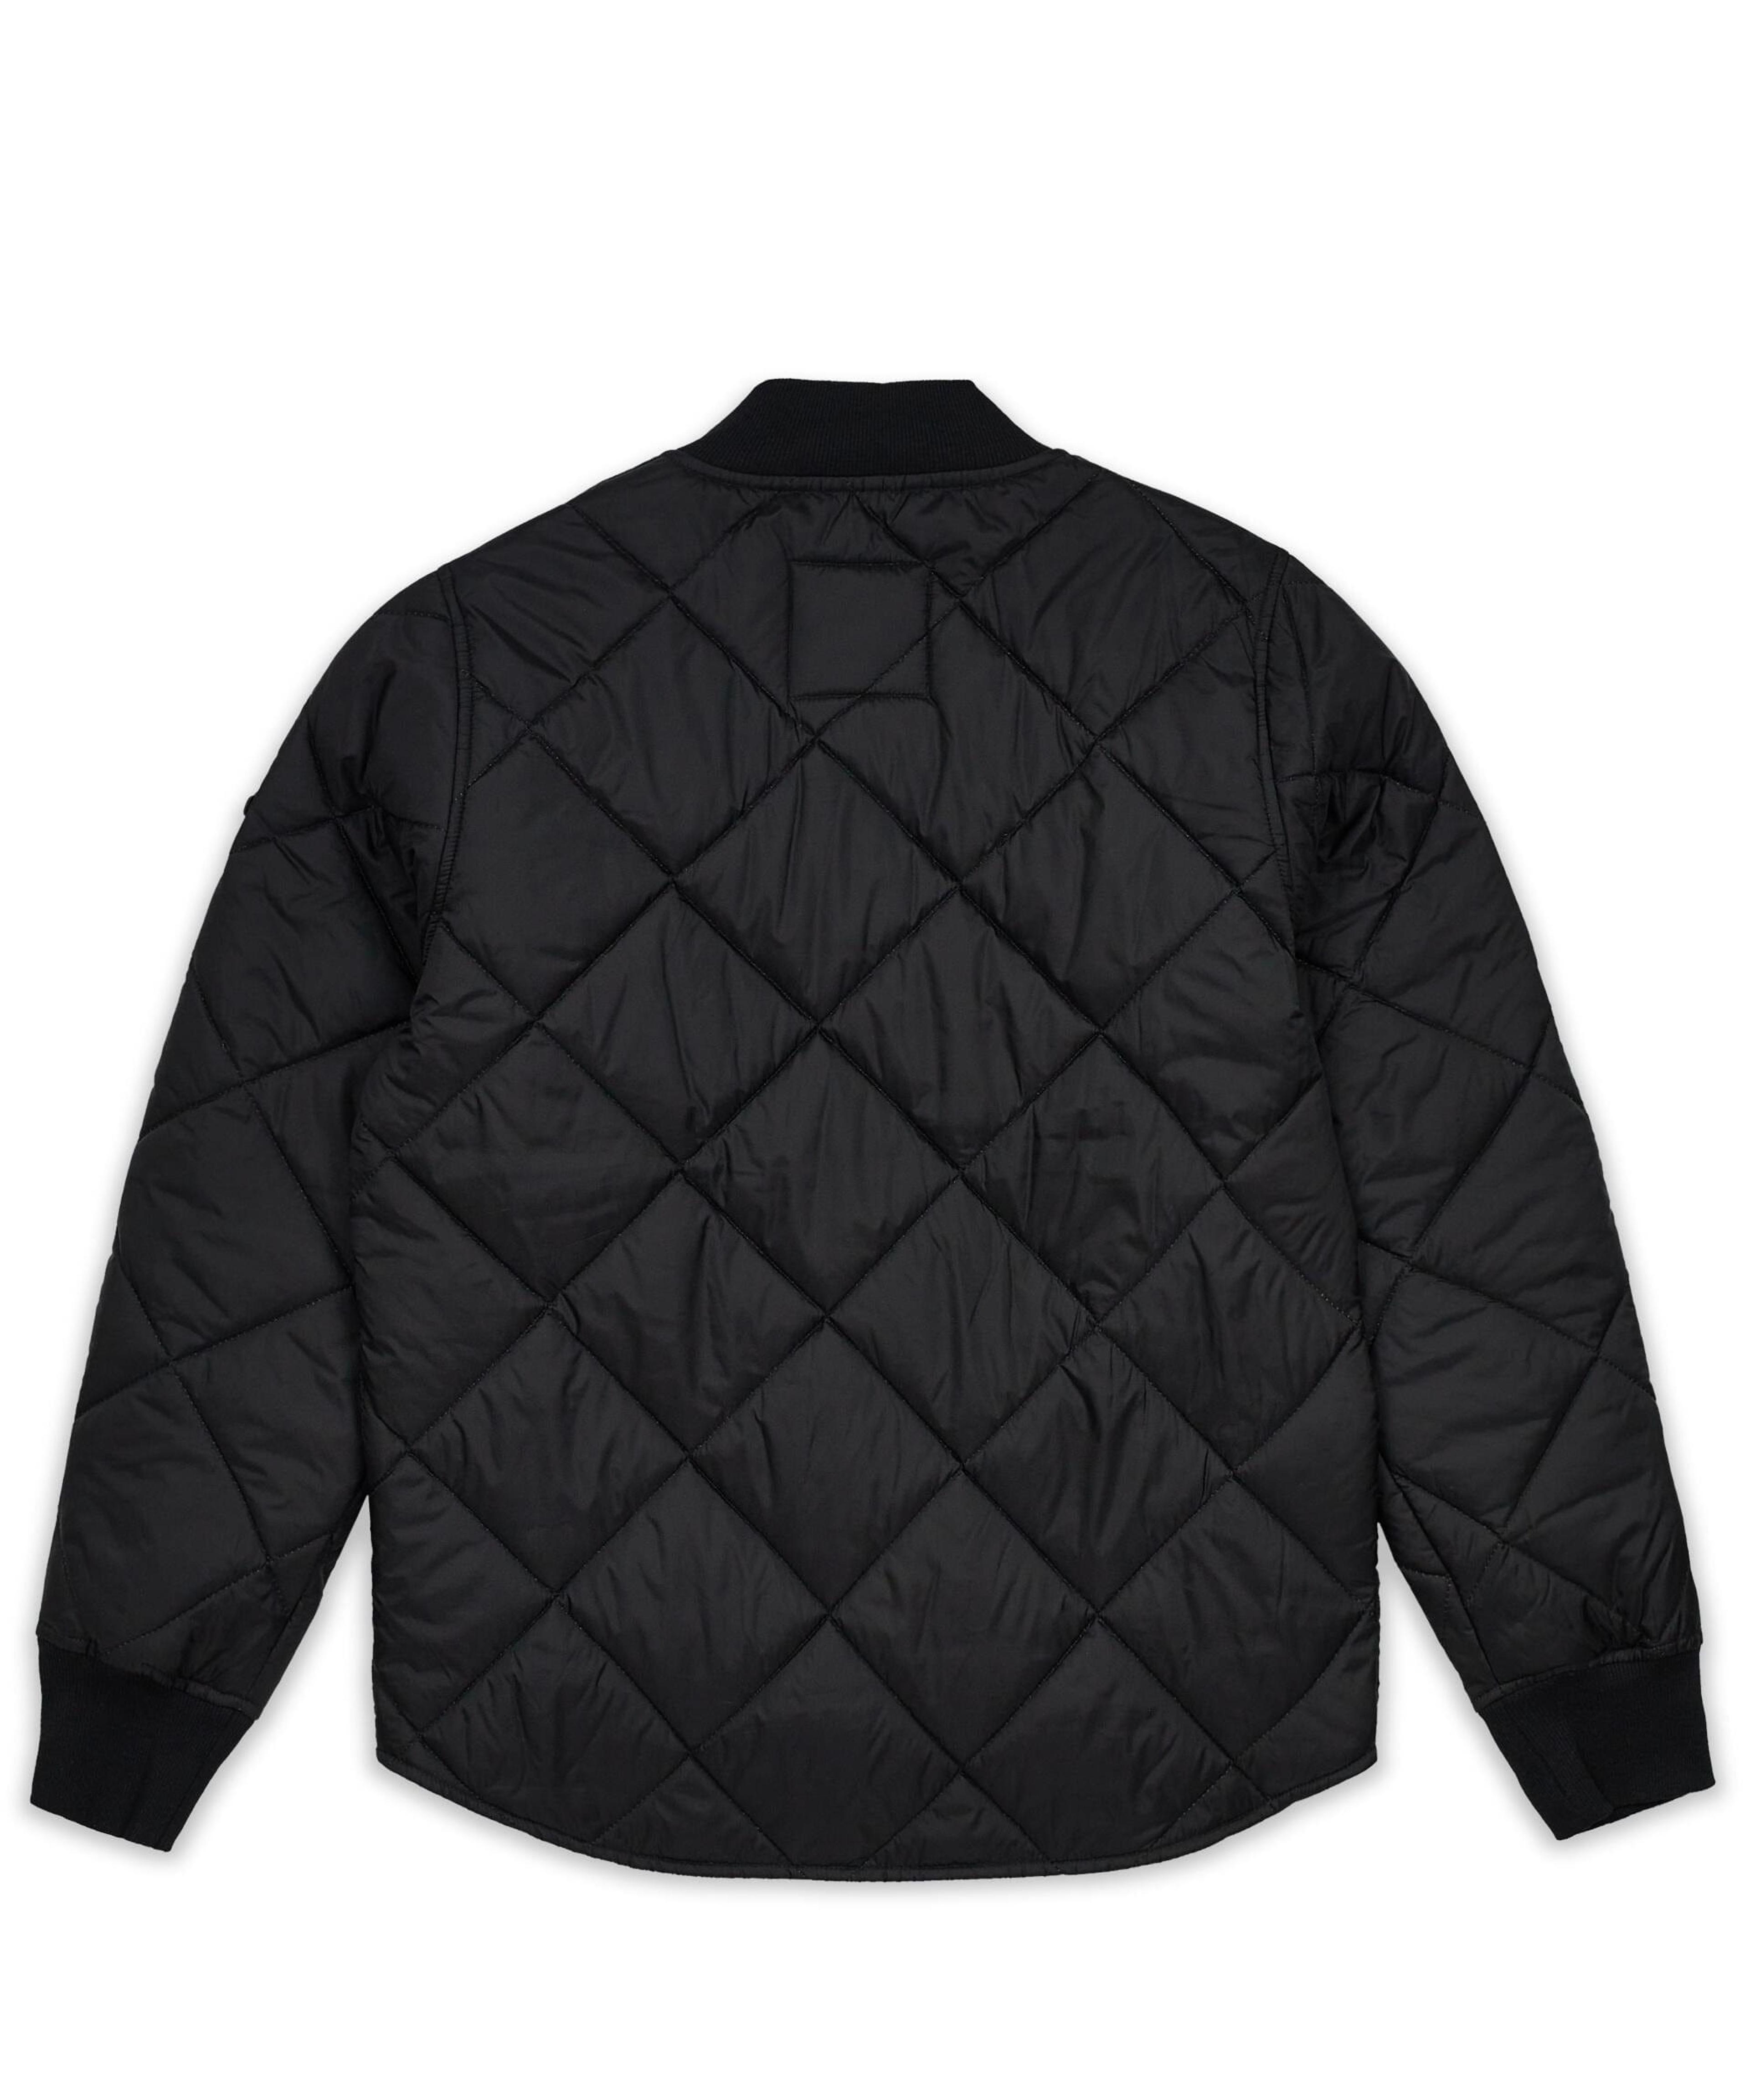 Alternate View 3 of Quilted Shirt Jacket With Lining - Black